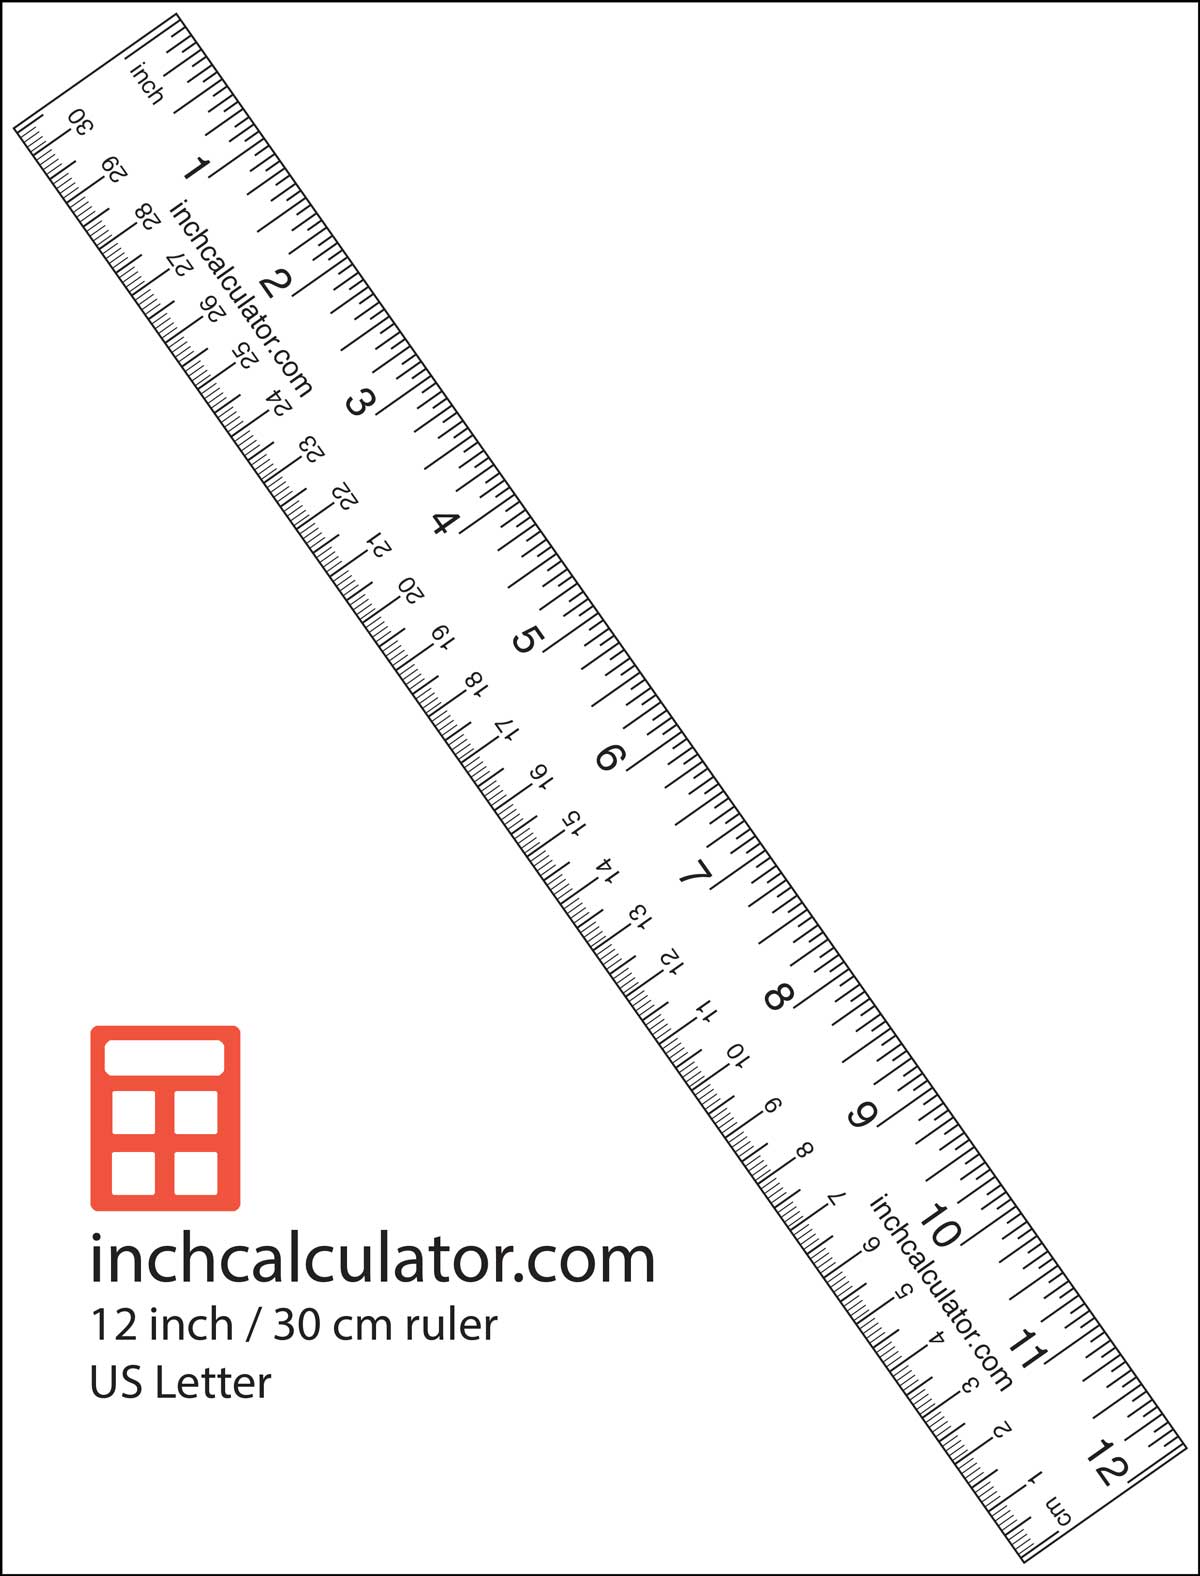 Print a paper ruler to take measurements when you don't have a tape measure or ruler